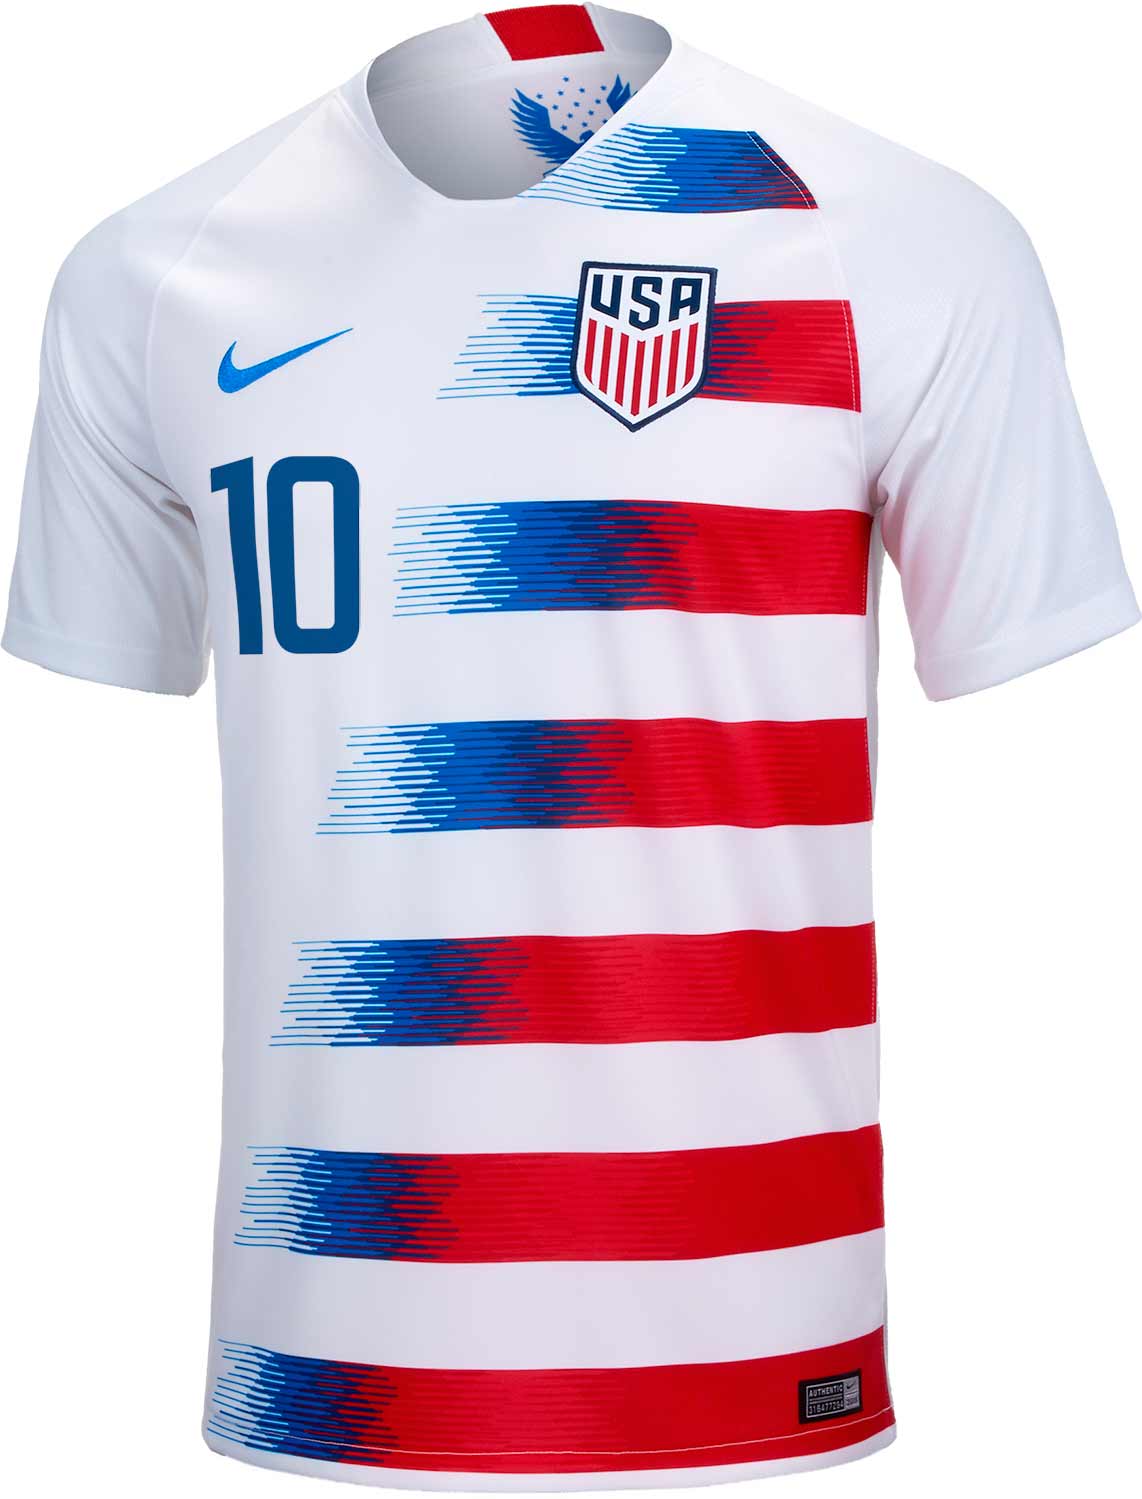 Buy Nike Youth Christian Pulisic USA Home Jersey 2018-19, White/Red/Blue,  Medium Online at Low Prices in India 